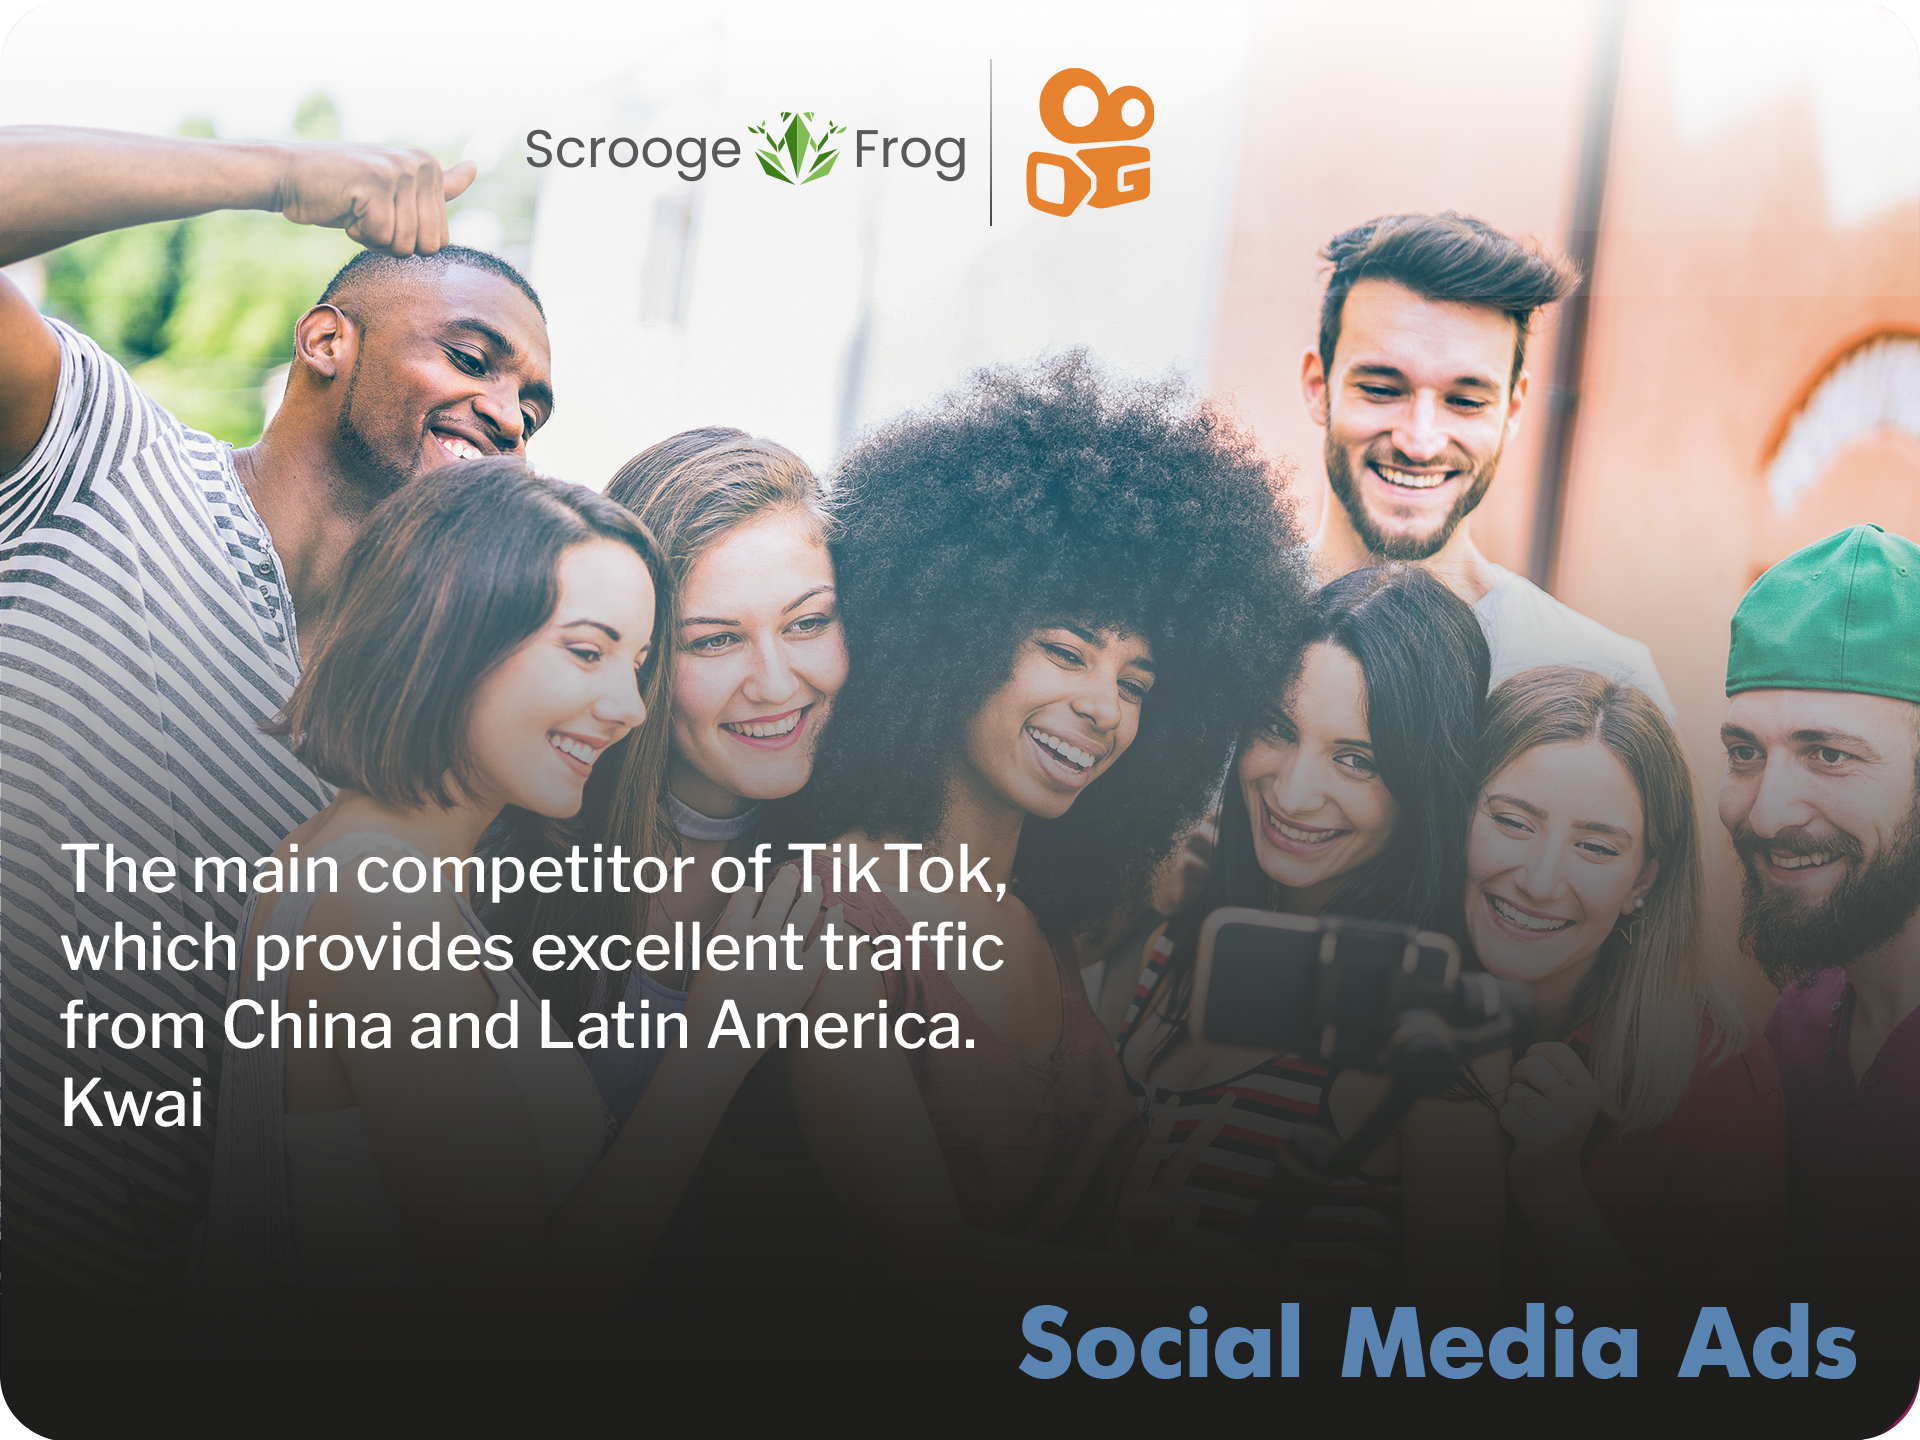 The main competitor of TikTok, which provides excellent traffic from China and Latin America. Kwai